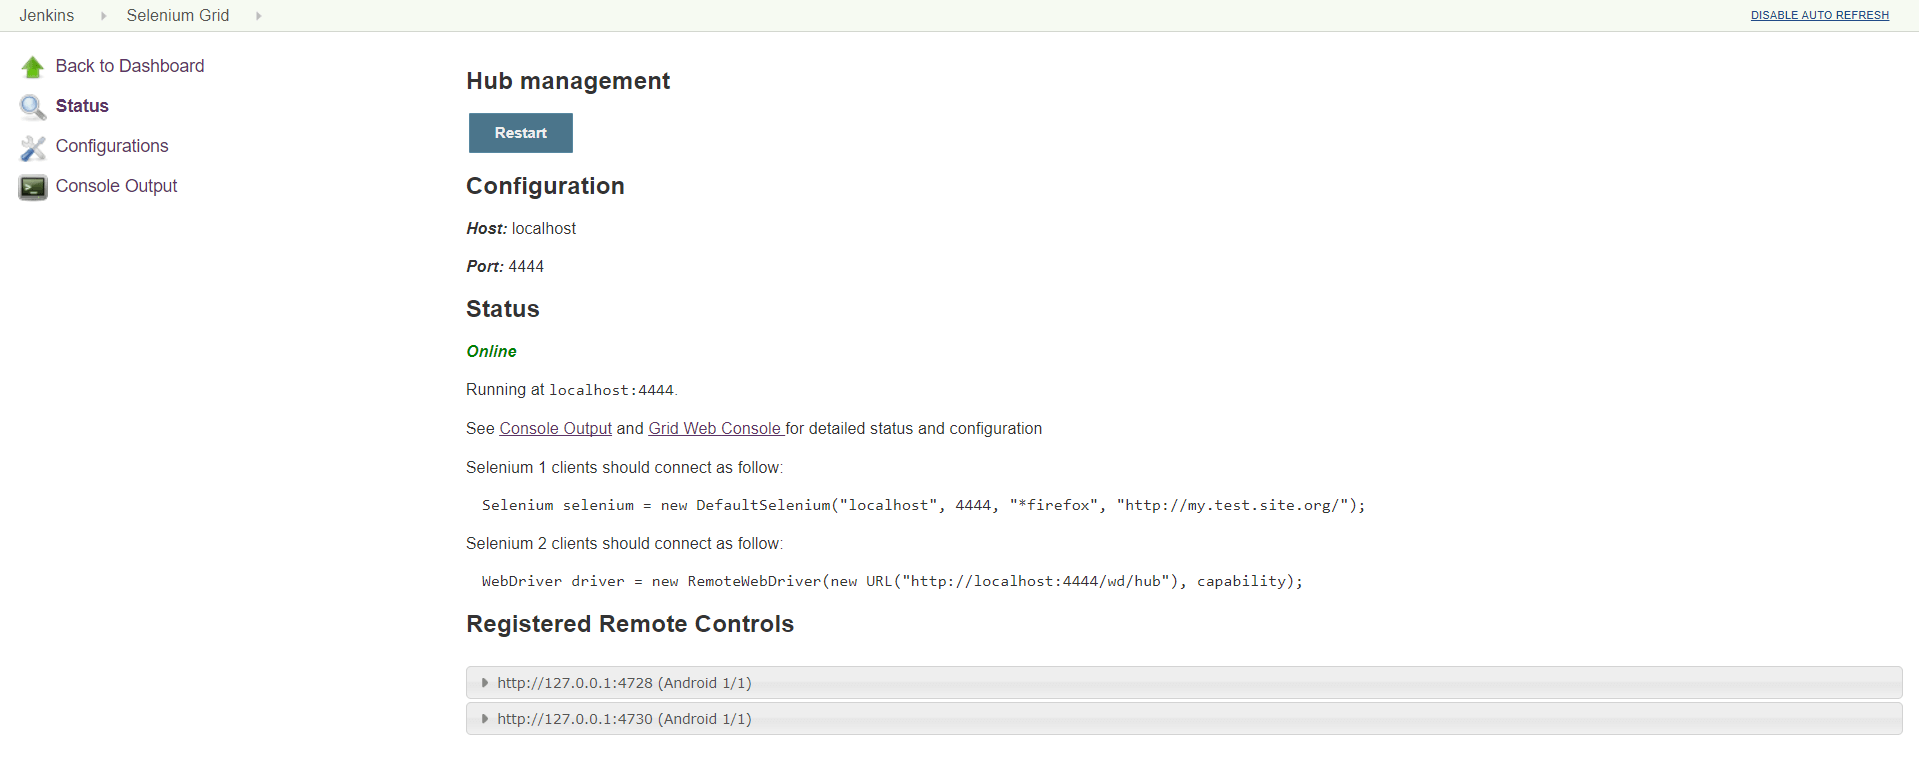 Jenkins Selenium Grid with connected and registered mobile nodes